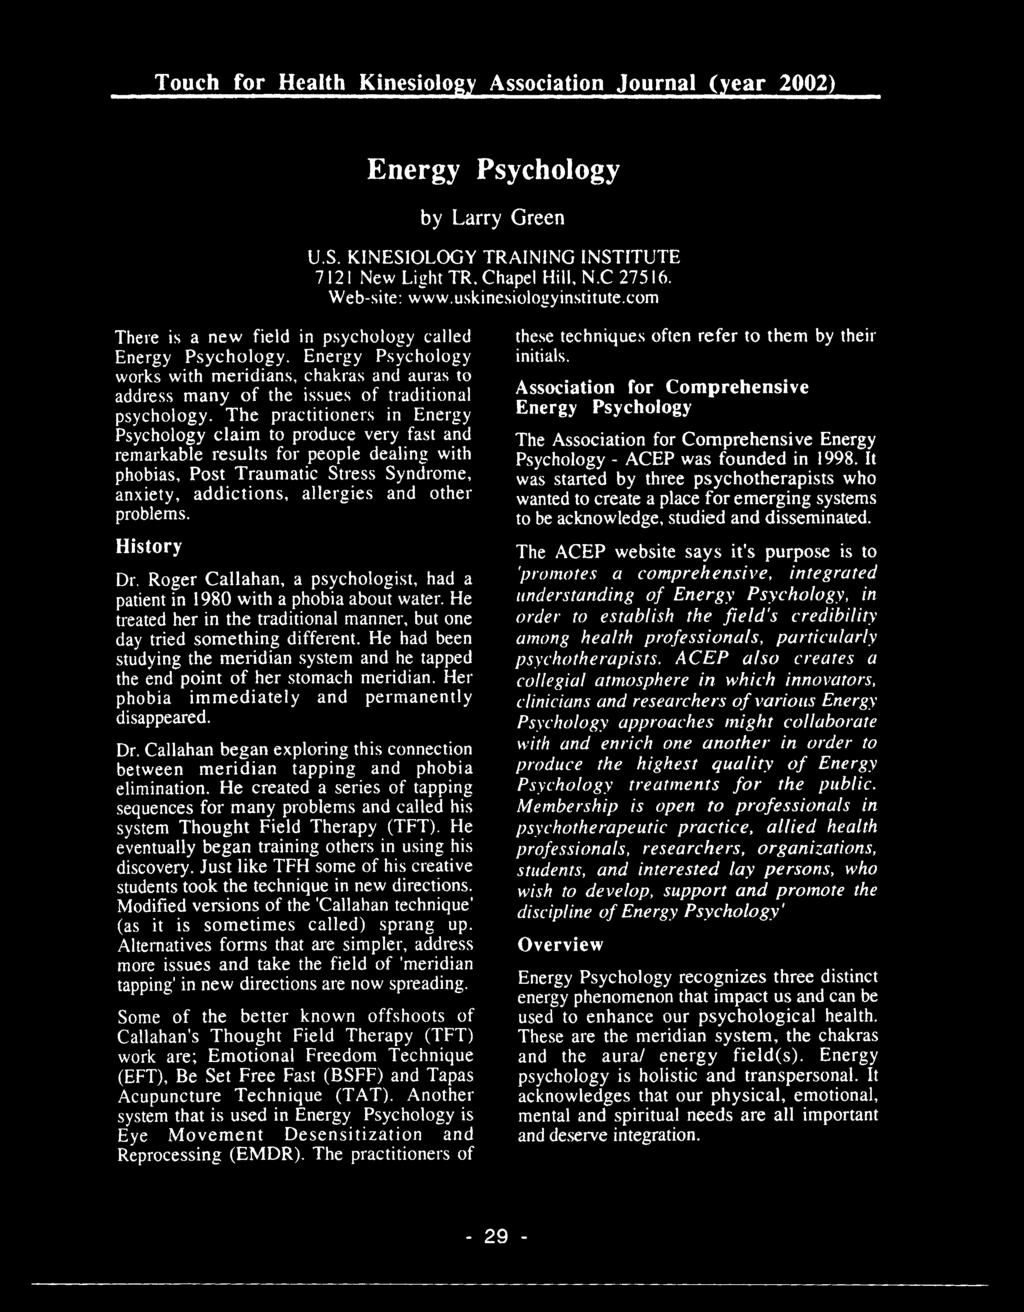 Energy Psychology works with meridians, chakras and auras to address many of the issues of traditional psychology.